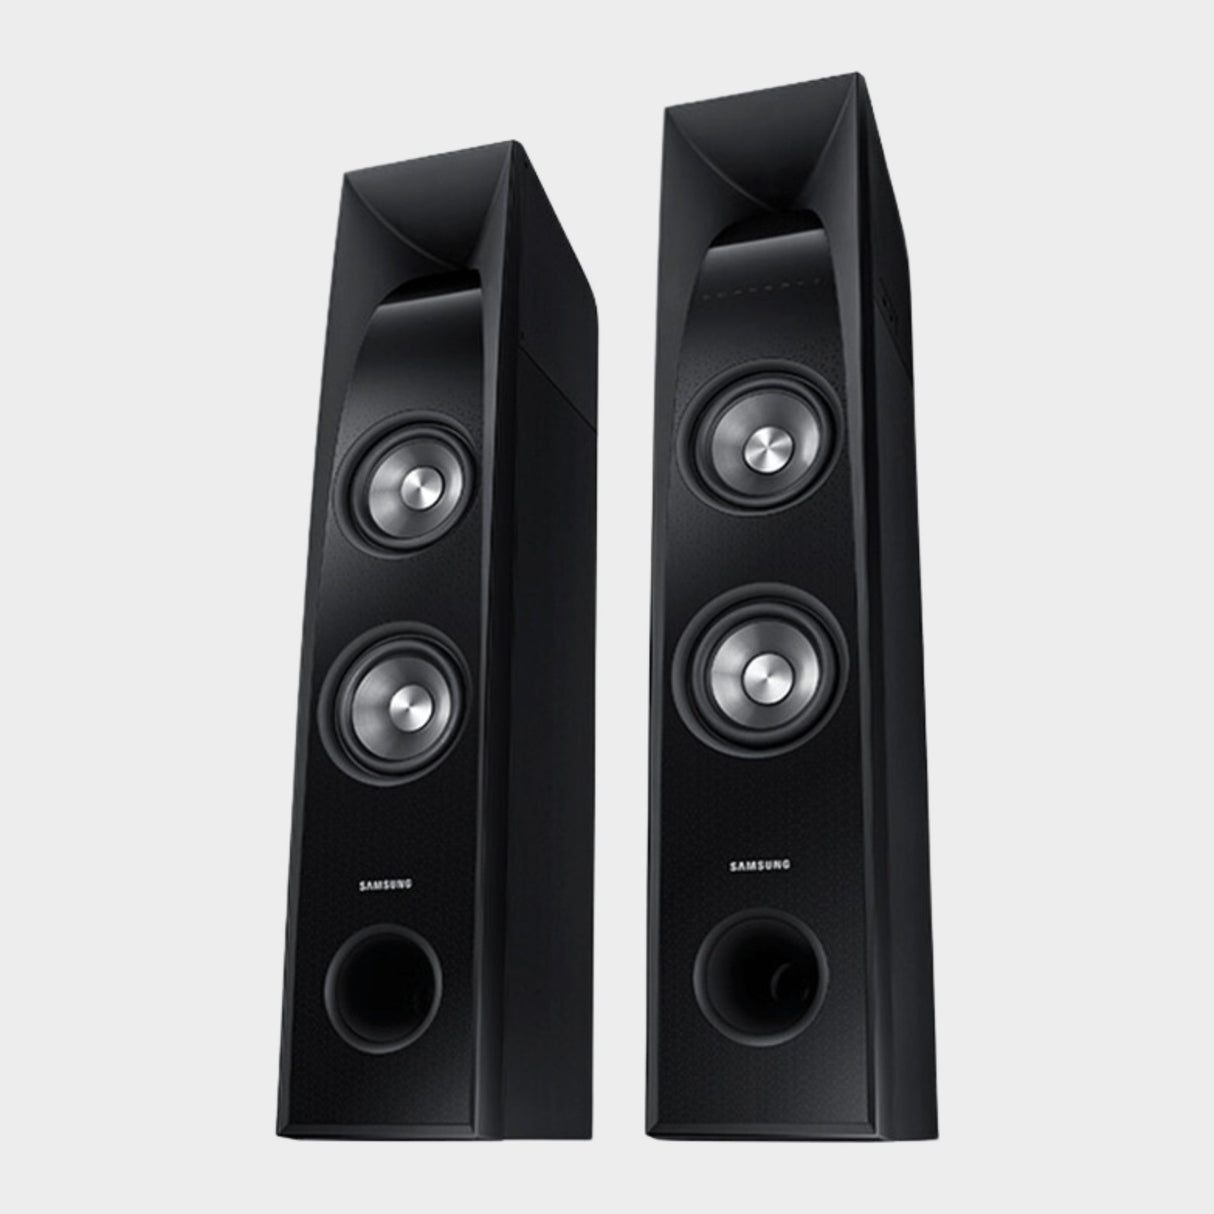 Samsung 2.3 Ch Sound Tower Home Theater System TW-H5500 350W